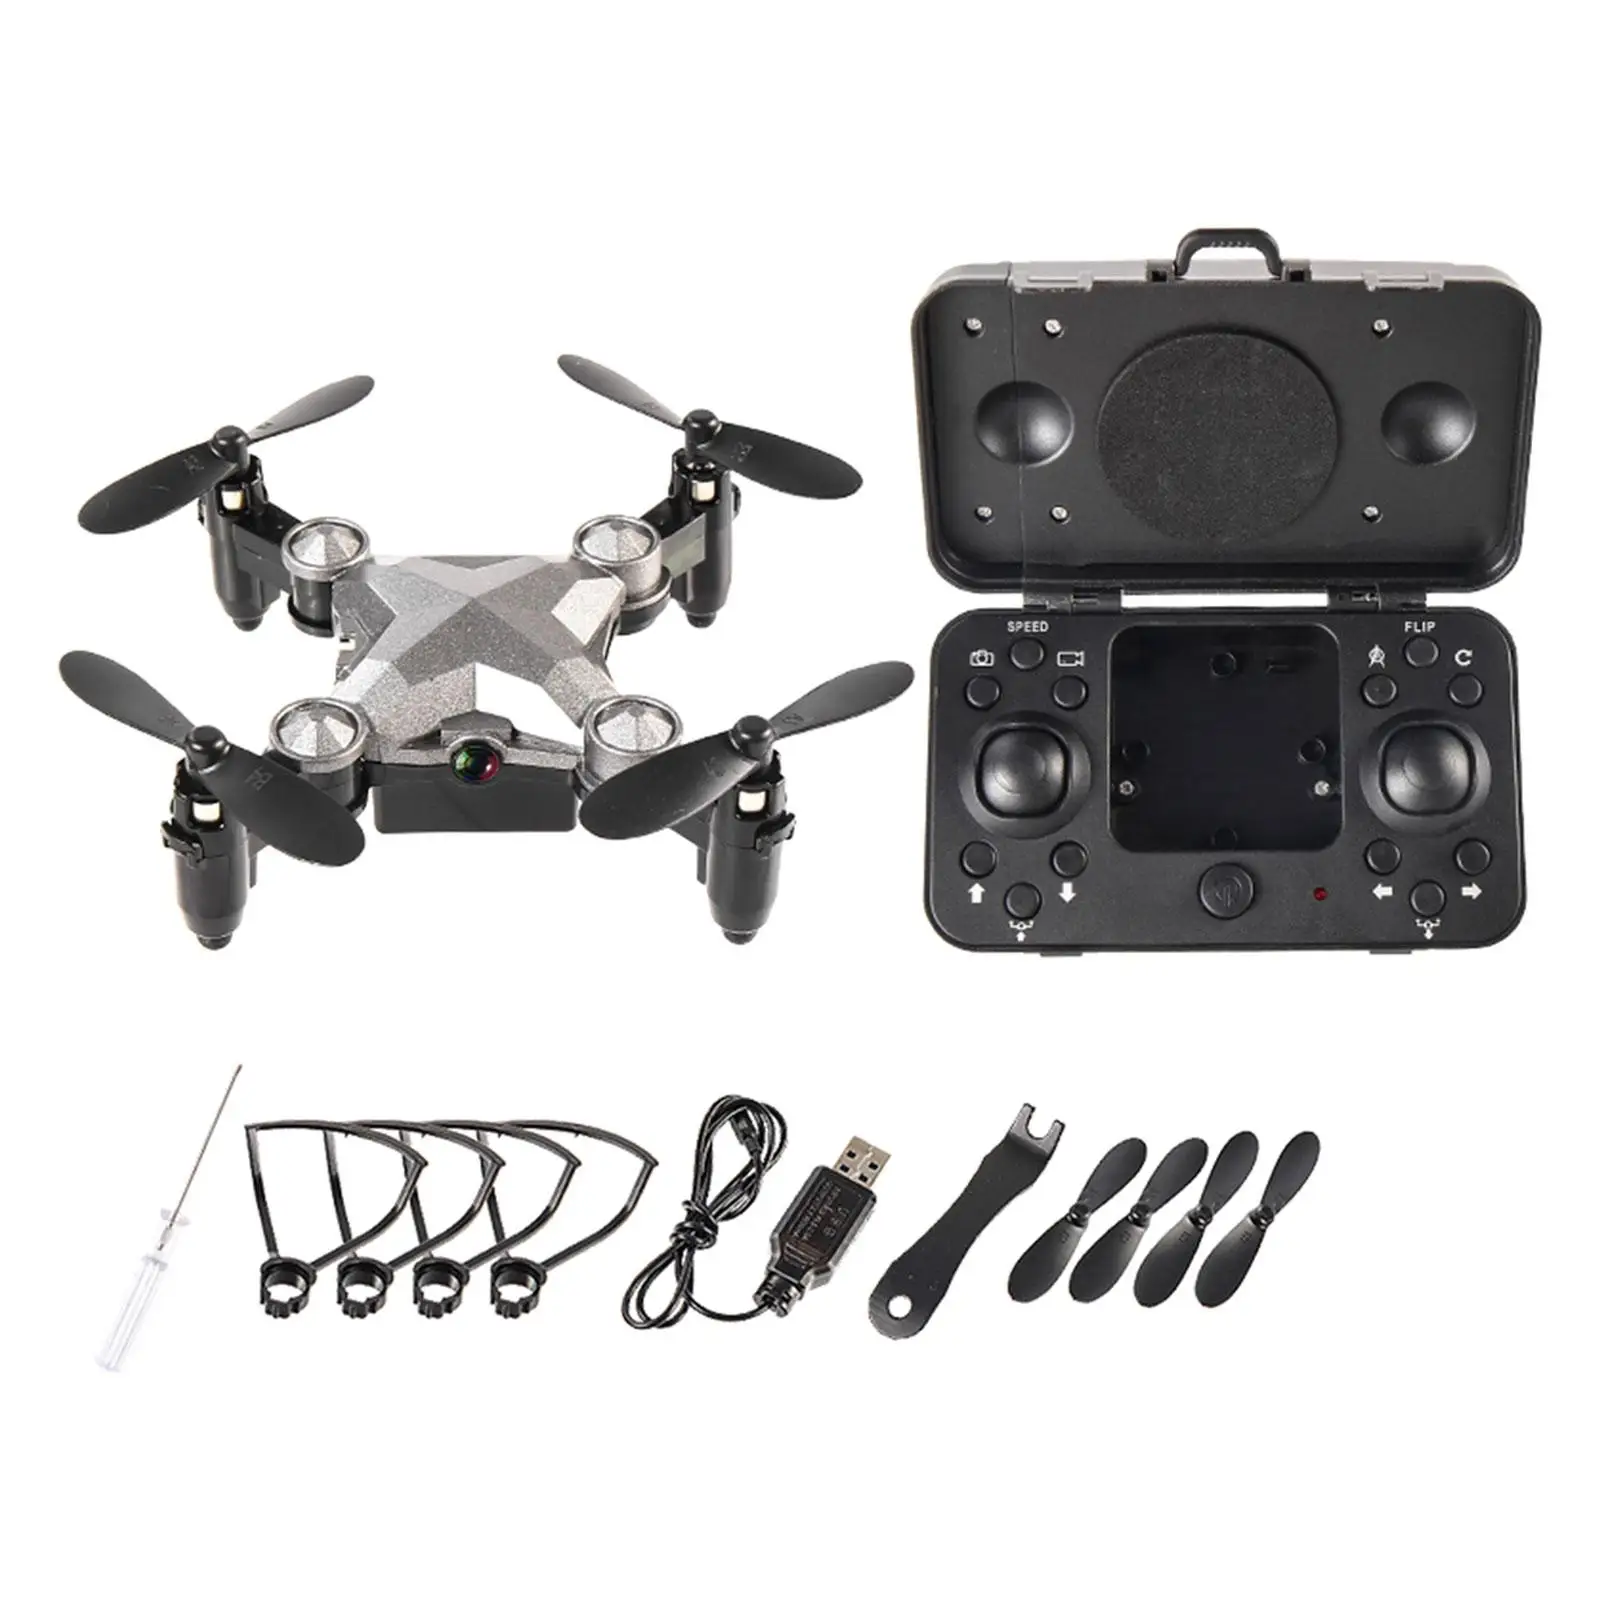 Mini Drone 720 Camera WiFi Real Time Transmission 4 Channels Portable RC Aircraft for Birthday Gift Helicopter Toys Children